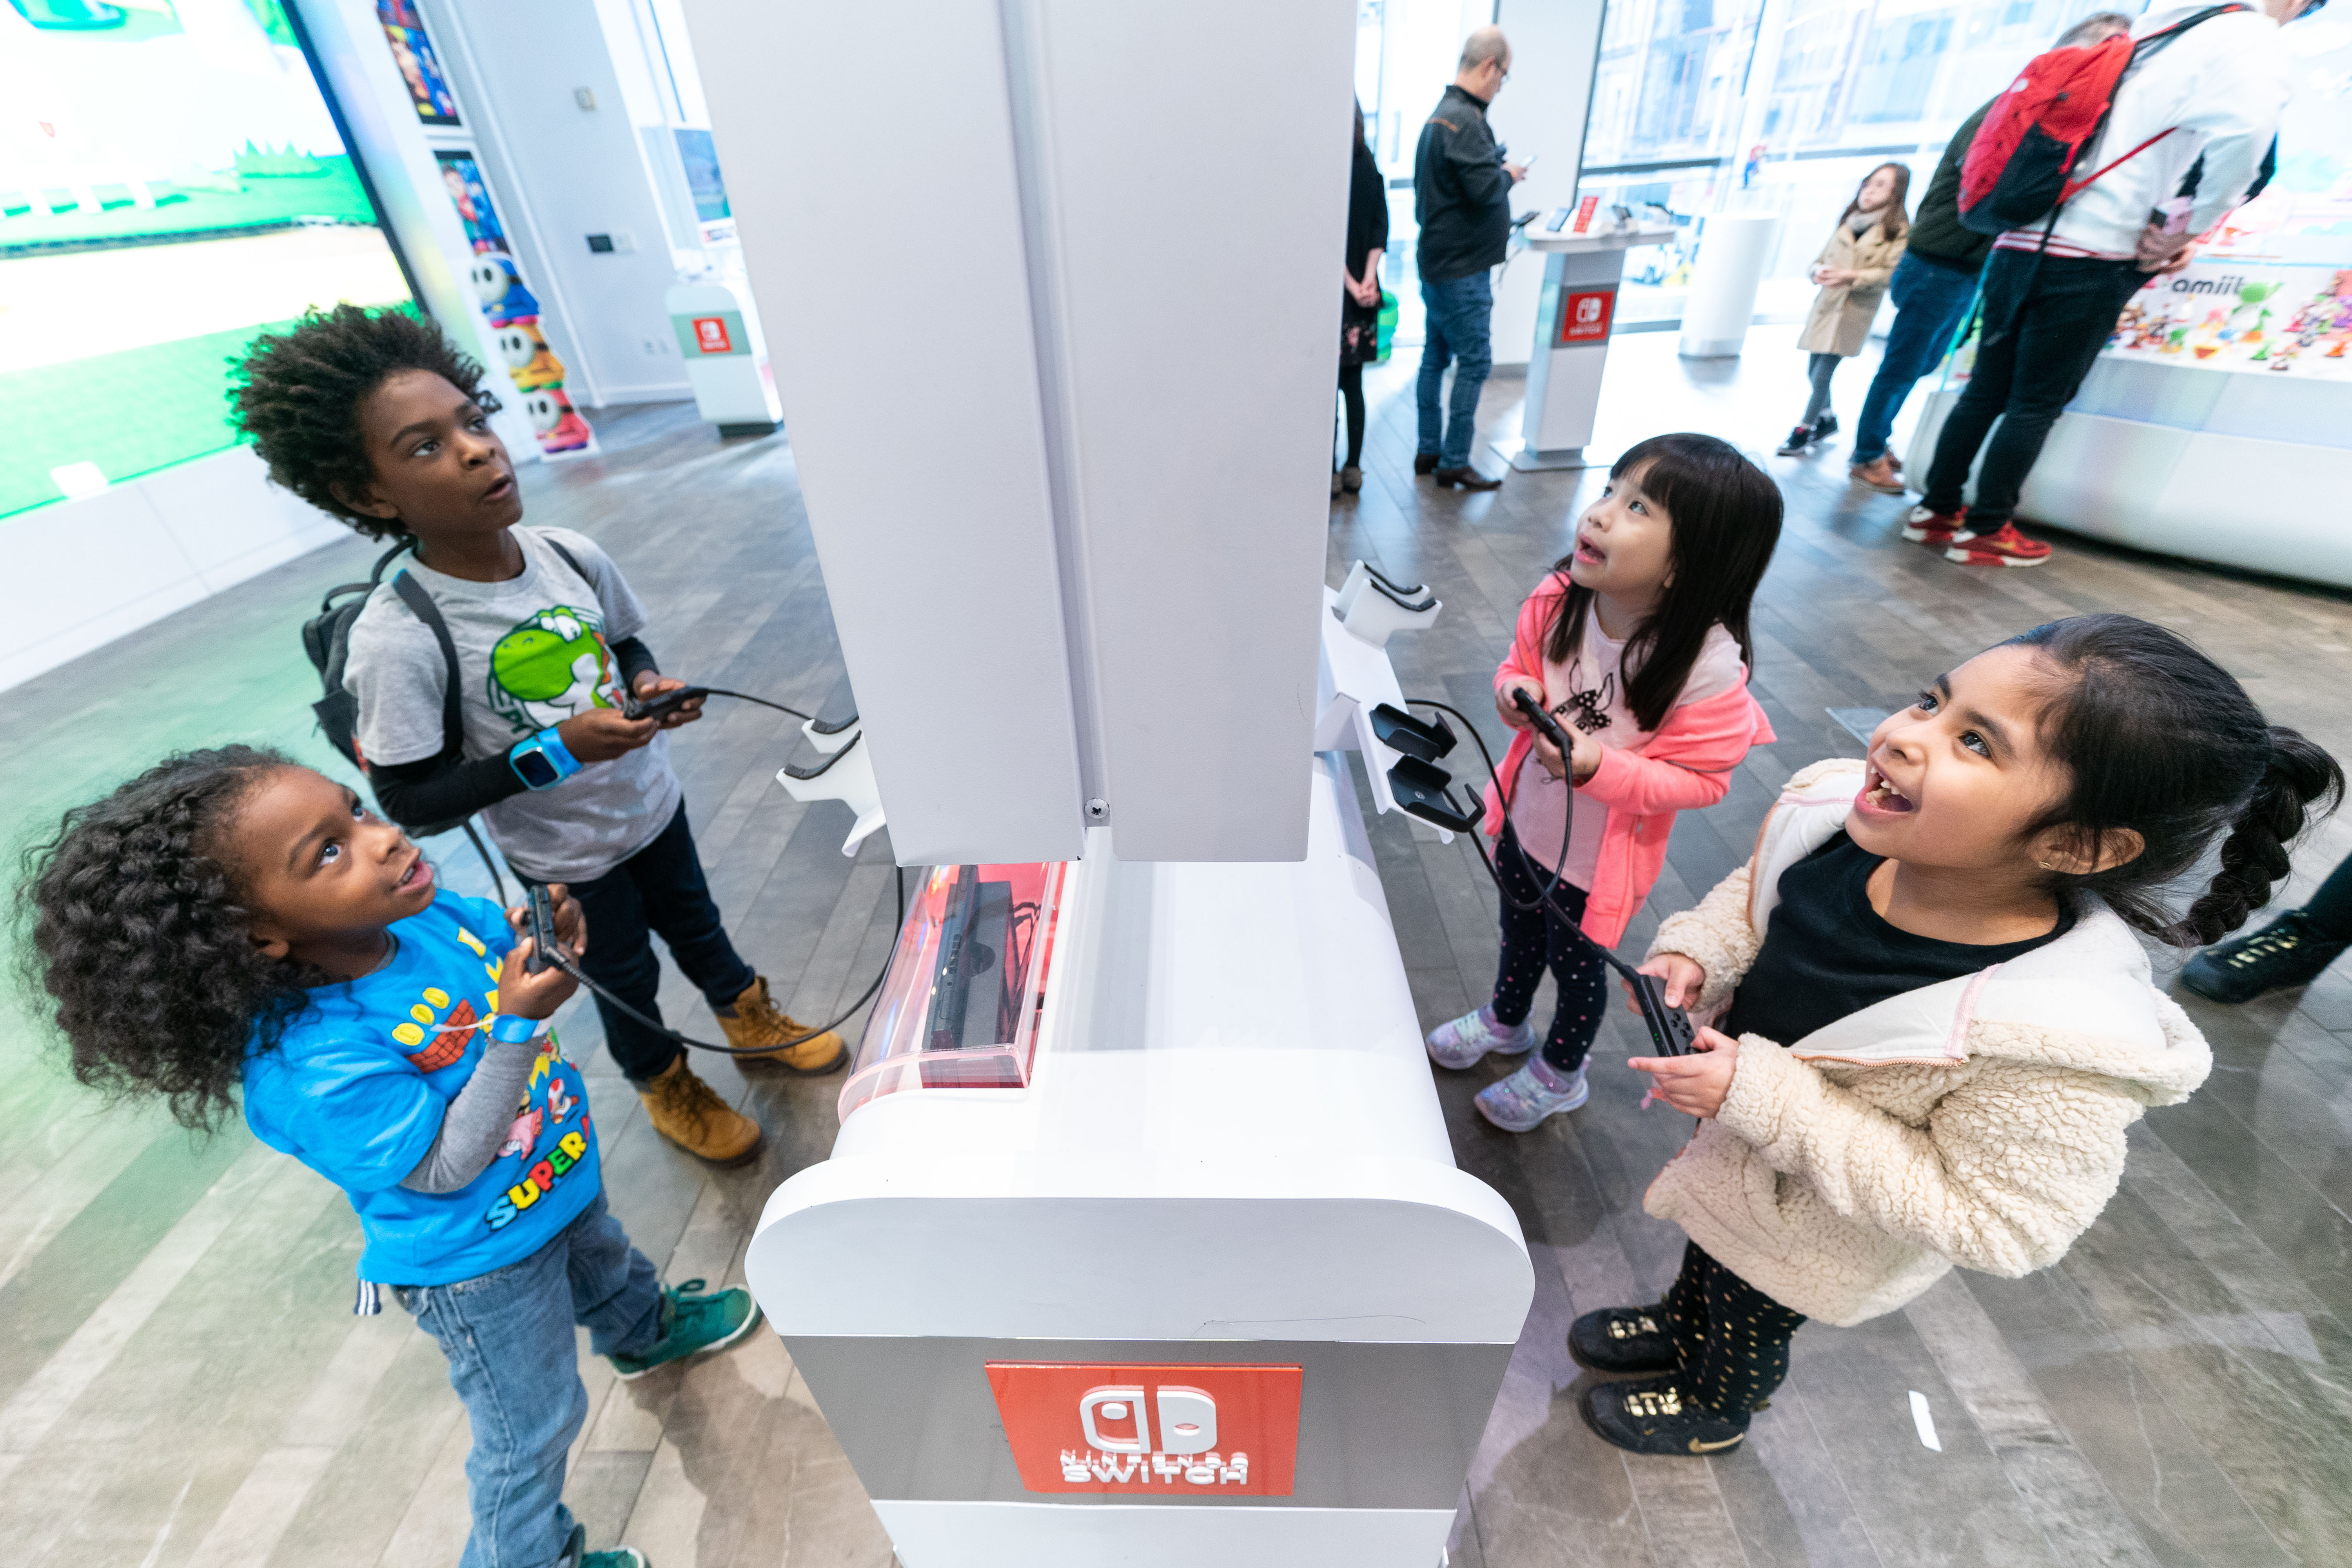 Photos of the Yoshi's Crafted World and Kirby's Extra Epic Yarn Launch  Event at Nintendo NY Store Are Available on Business Wire's Website and the  Associated Press Photo Network | Business Wire